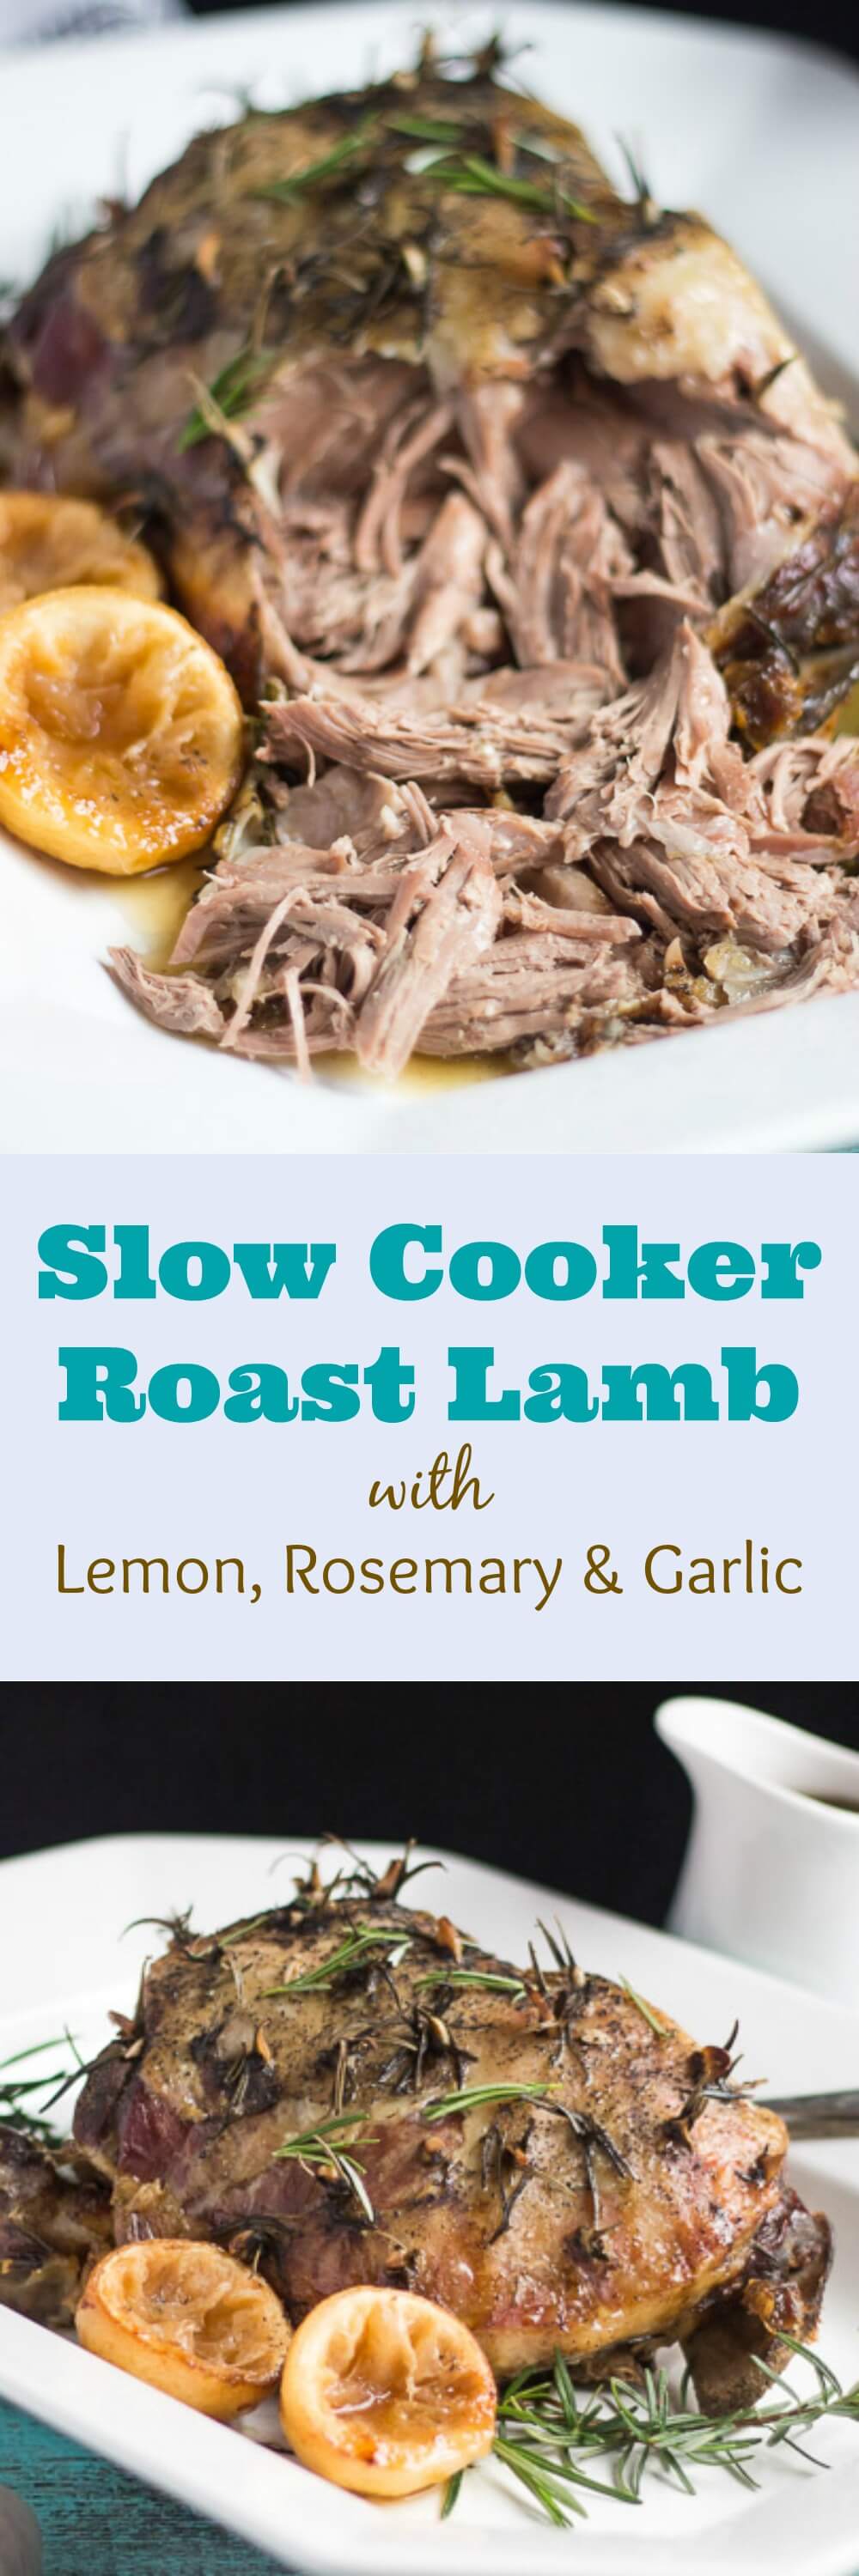 Easy Slow Cooker Leg of Lamb with Rosemary & Garlic